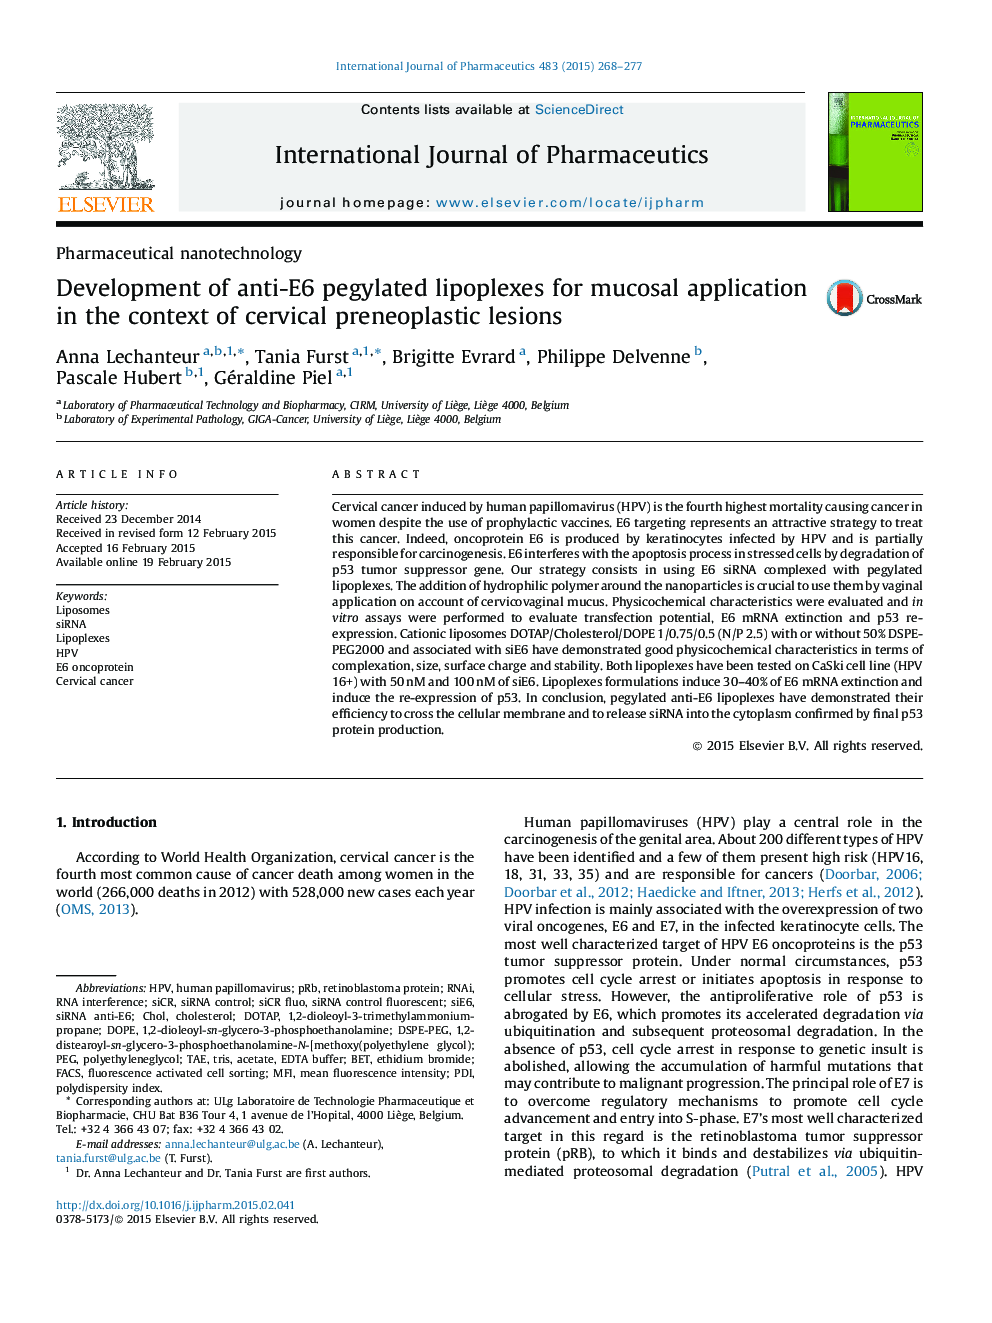 Development of anti-E6 pegylated lipoplexes for mucosal application in the context of cervical preneoplastic lesions